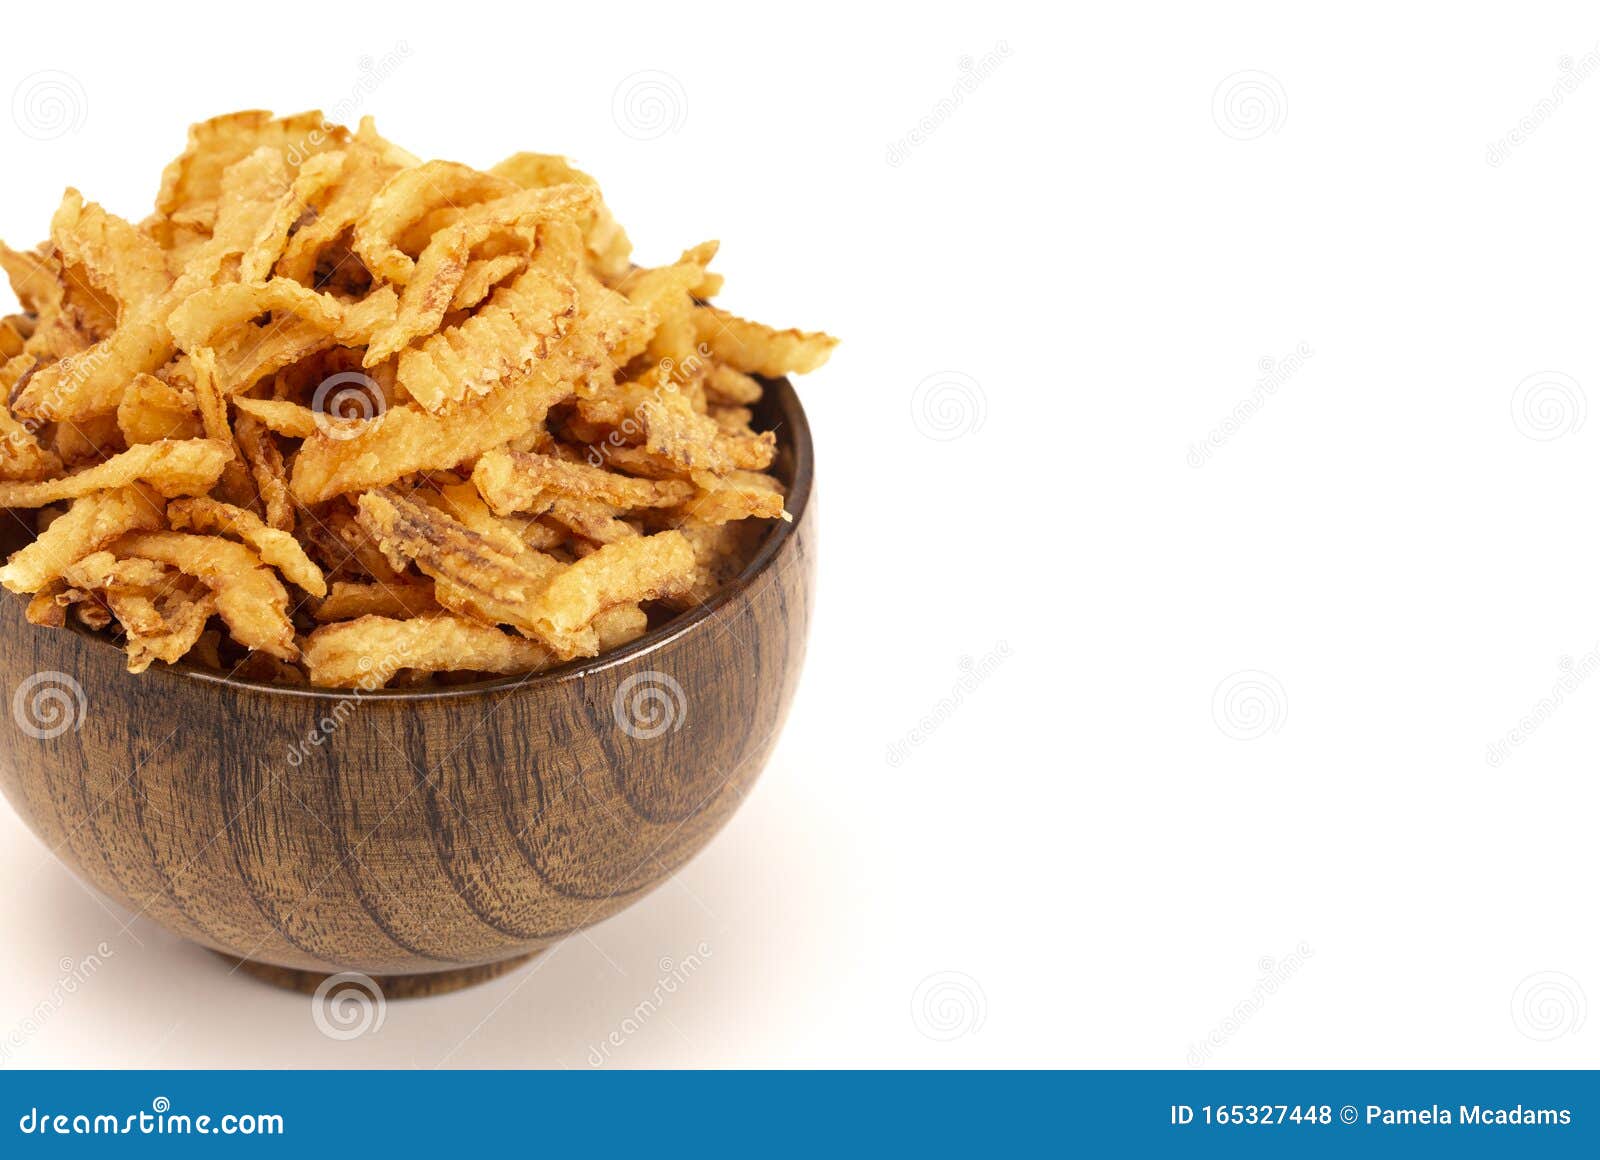 Fried Onions for Green Bean Casserole or Salad Garnish a White ...